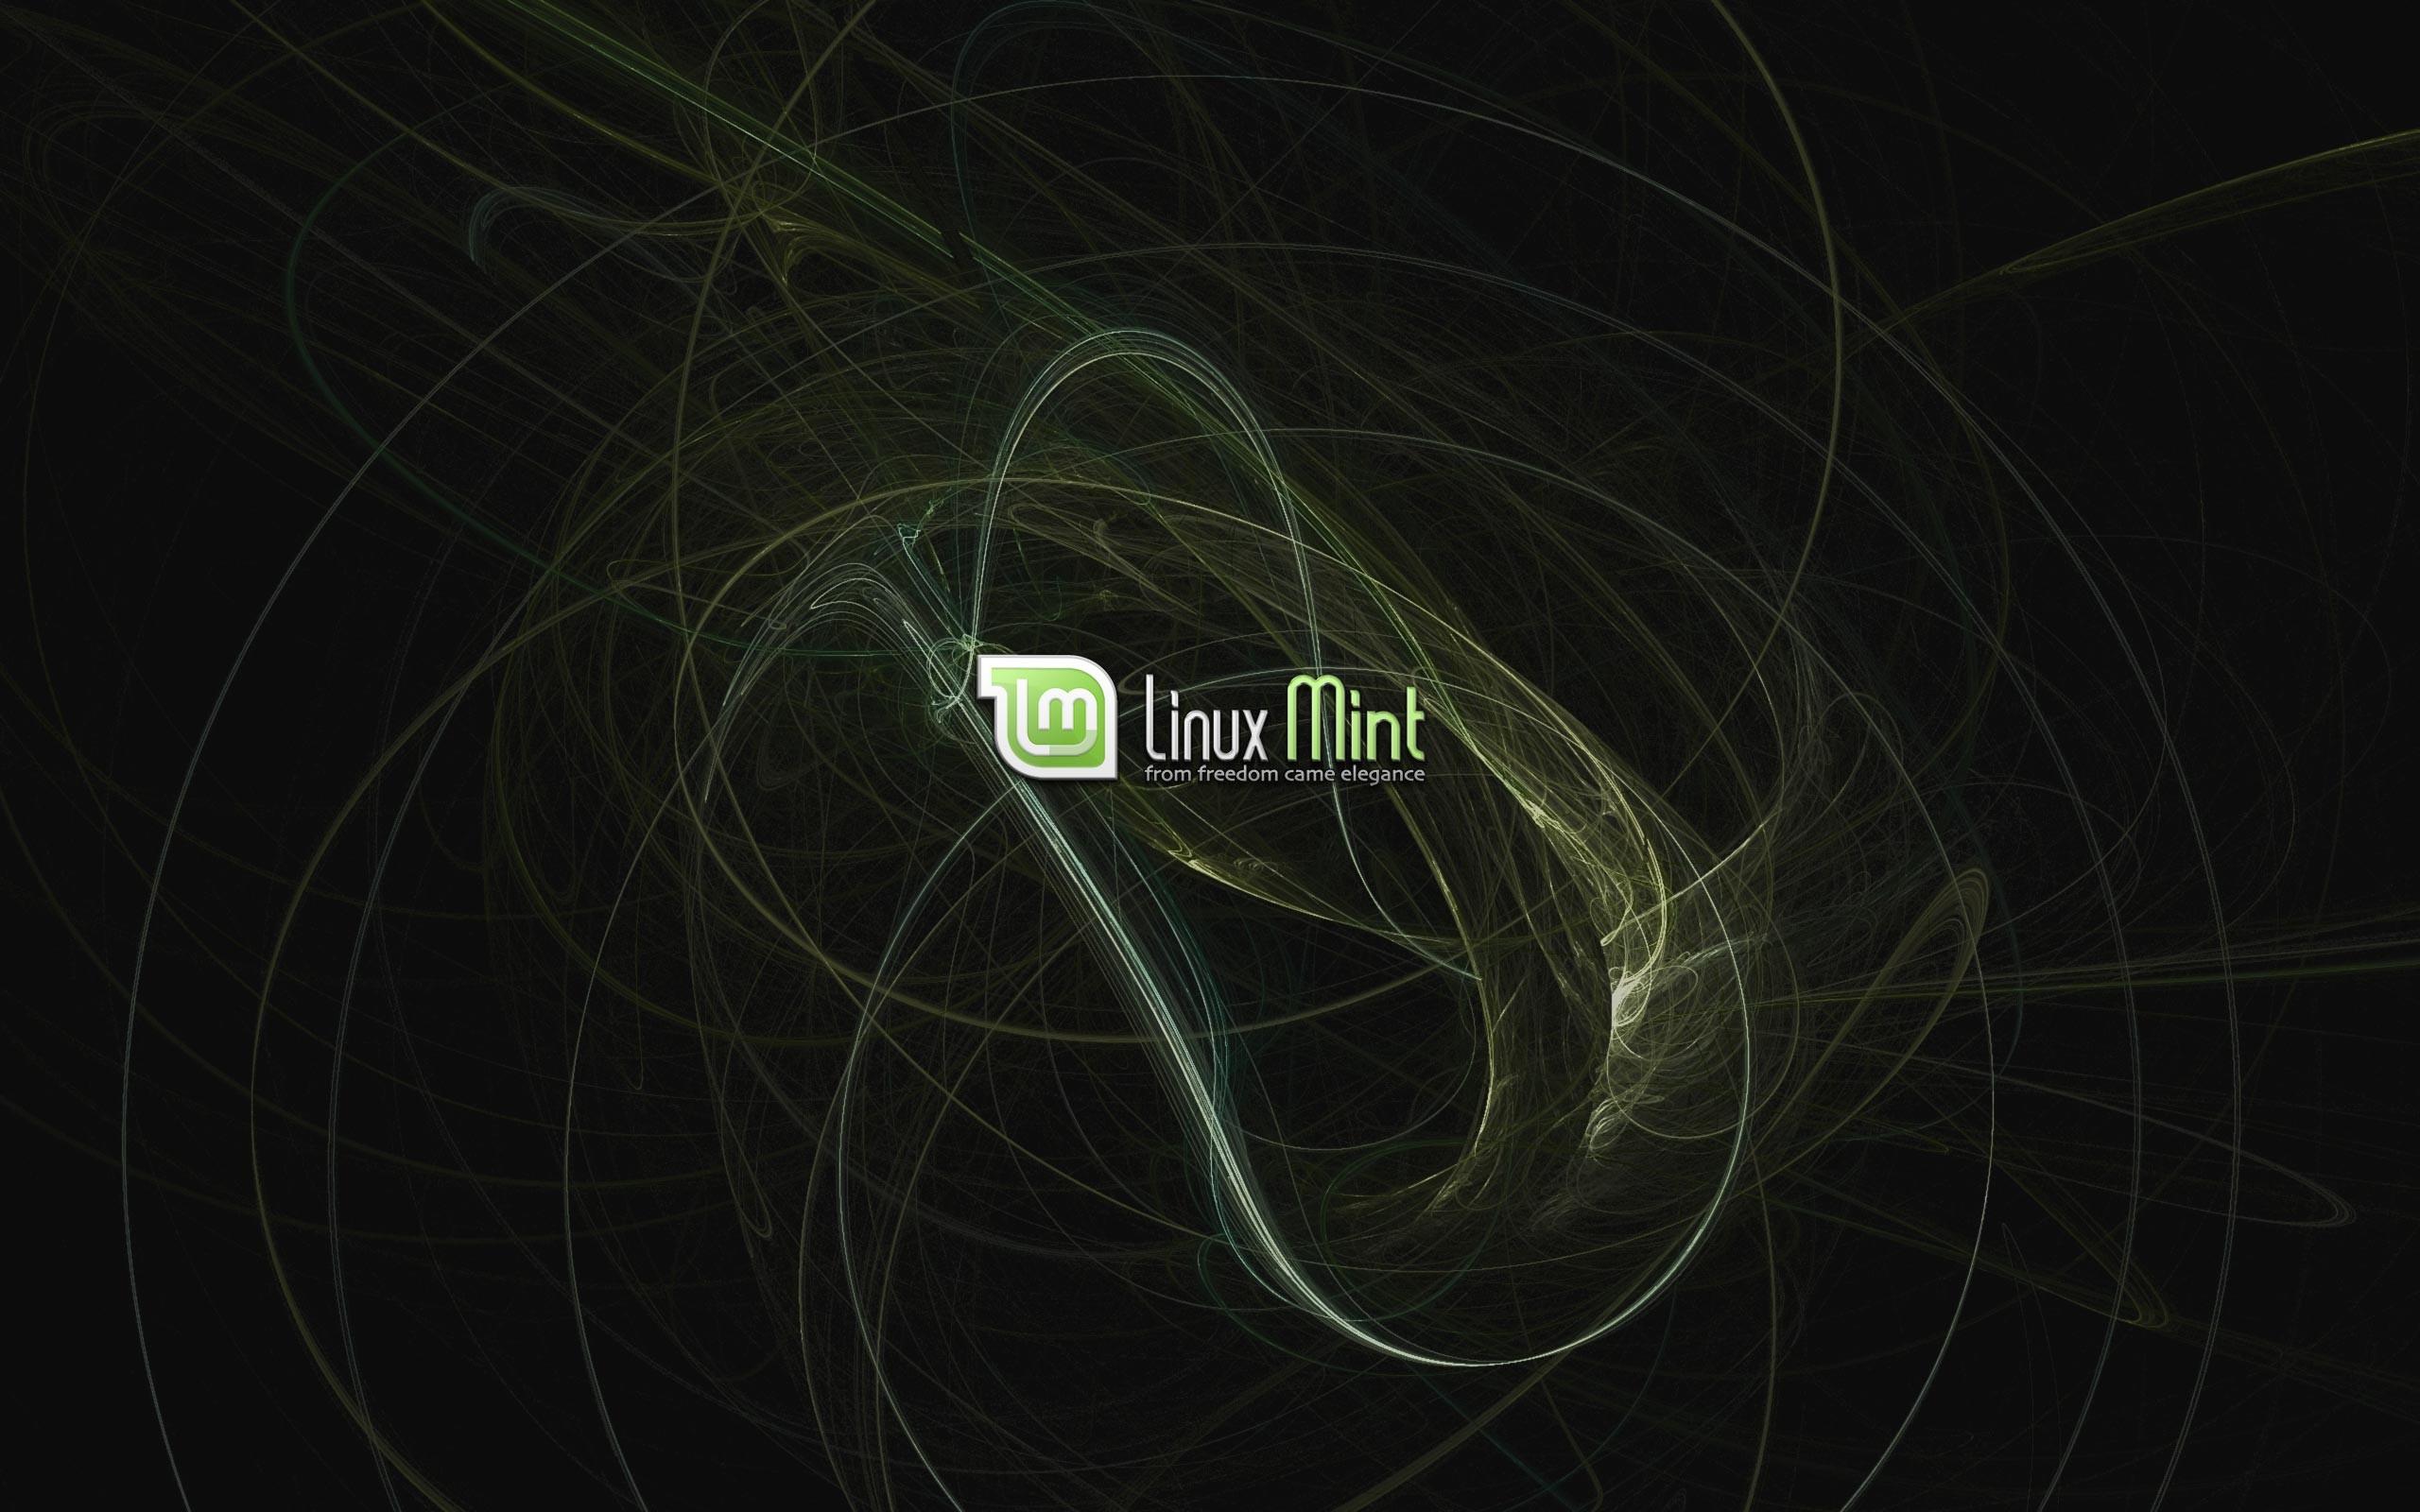 2560x1600 Get this package - Get more Linux Mint wallpapers - Official site of Linux  Mint.